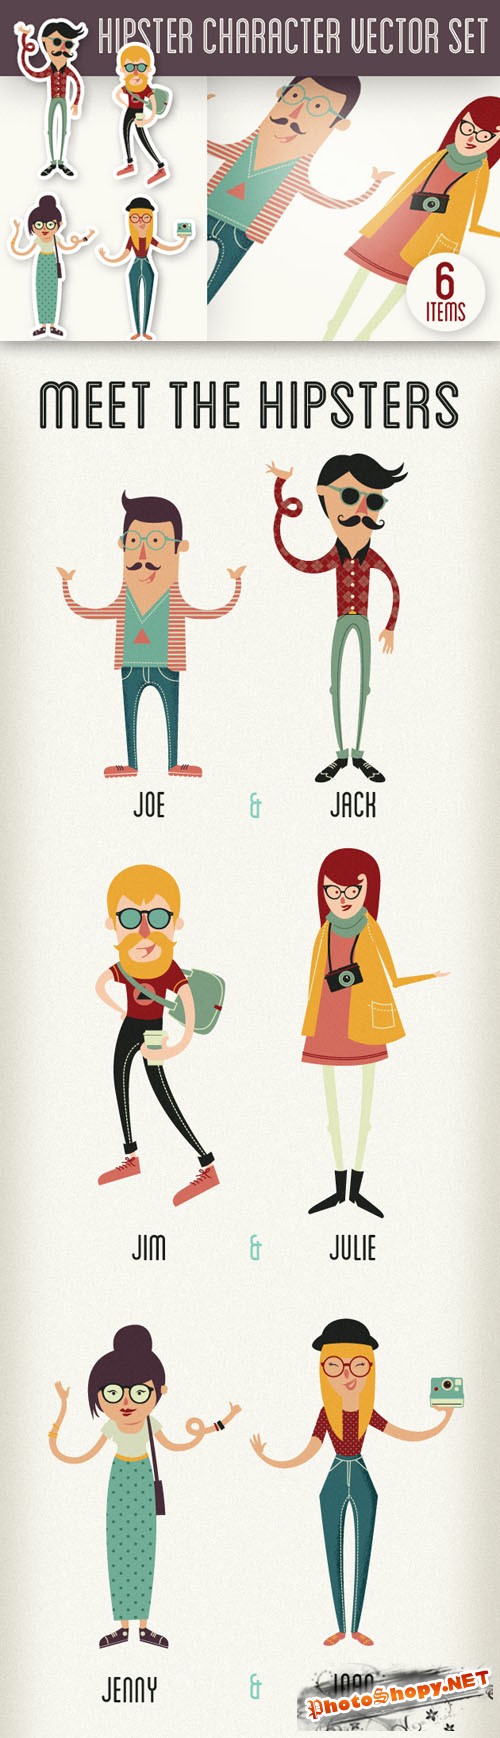 Hipster Photoshop Vector Character Set 1